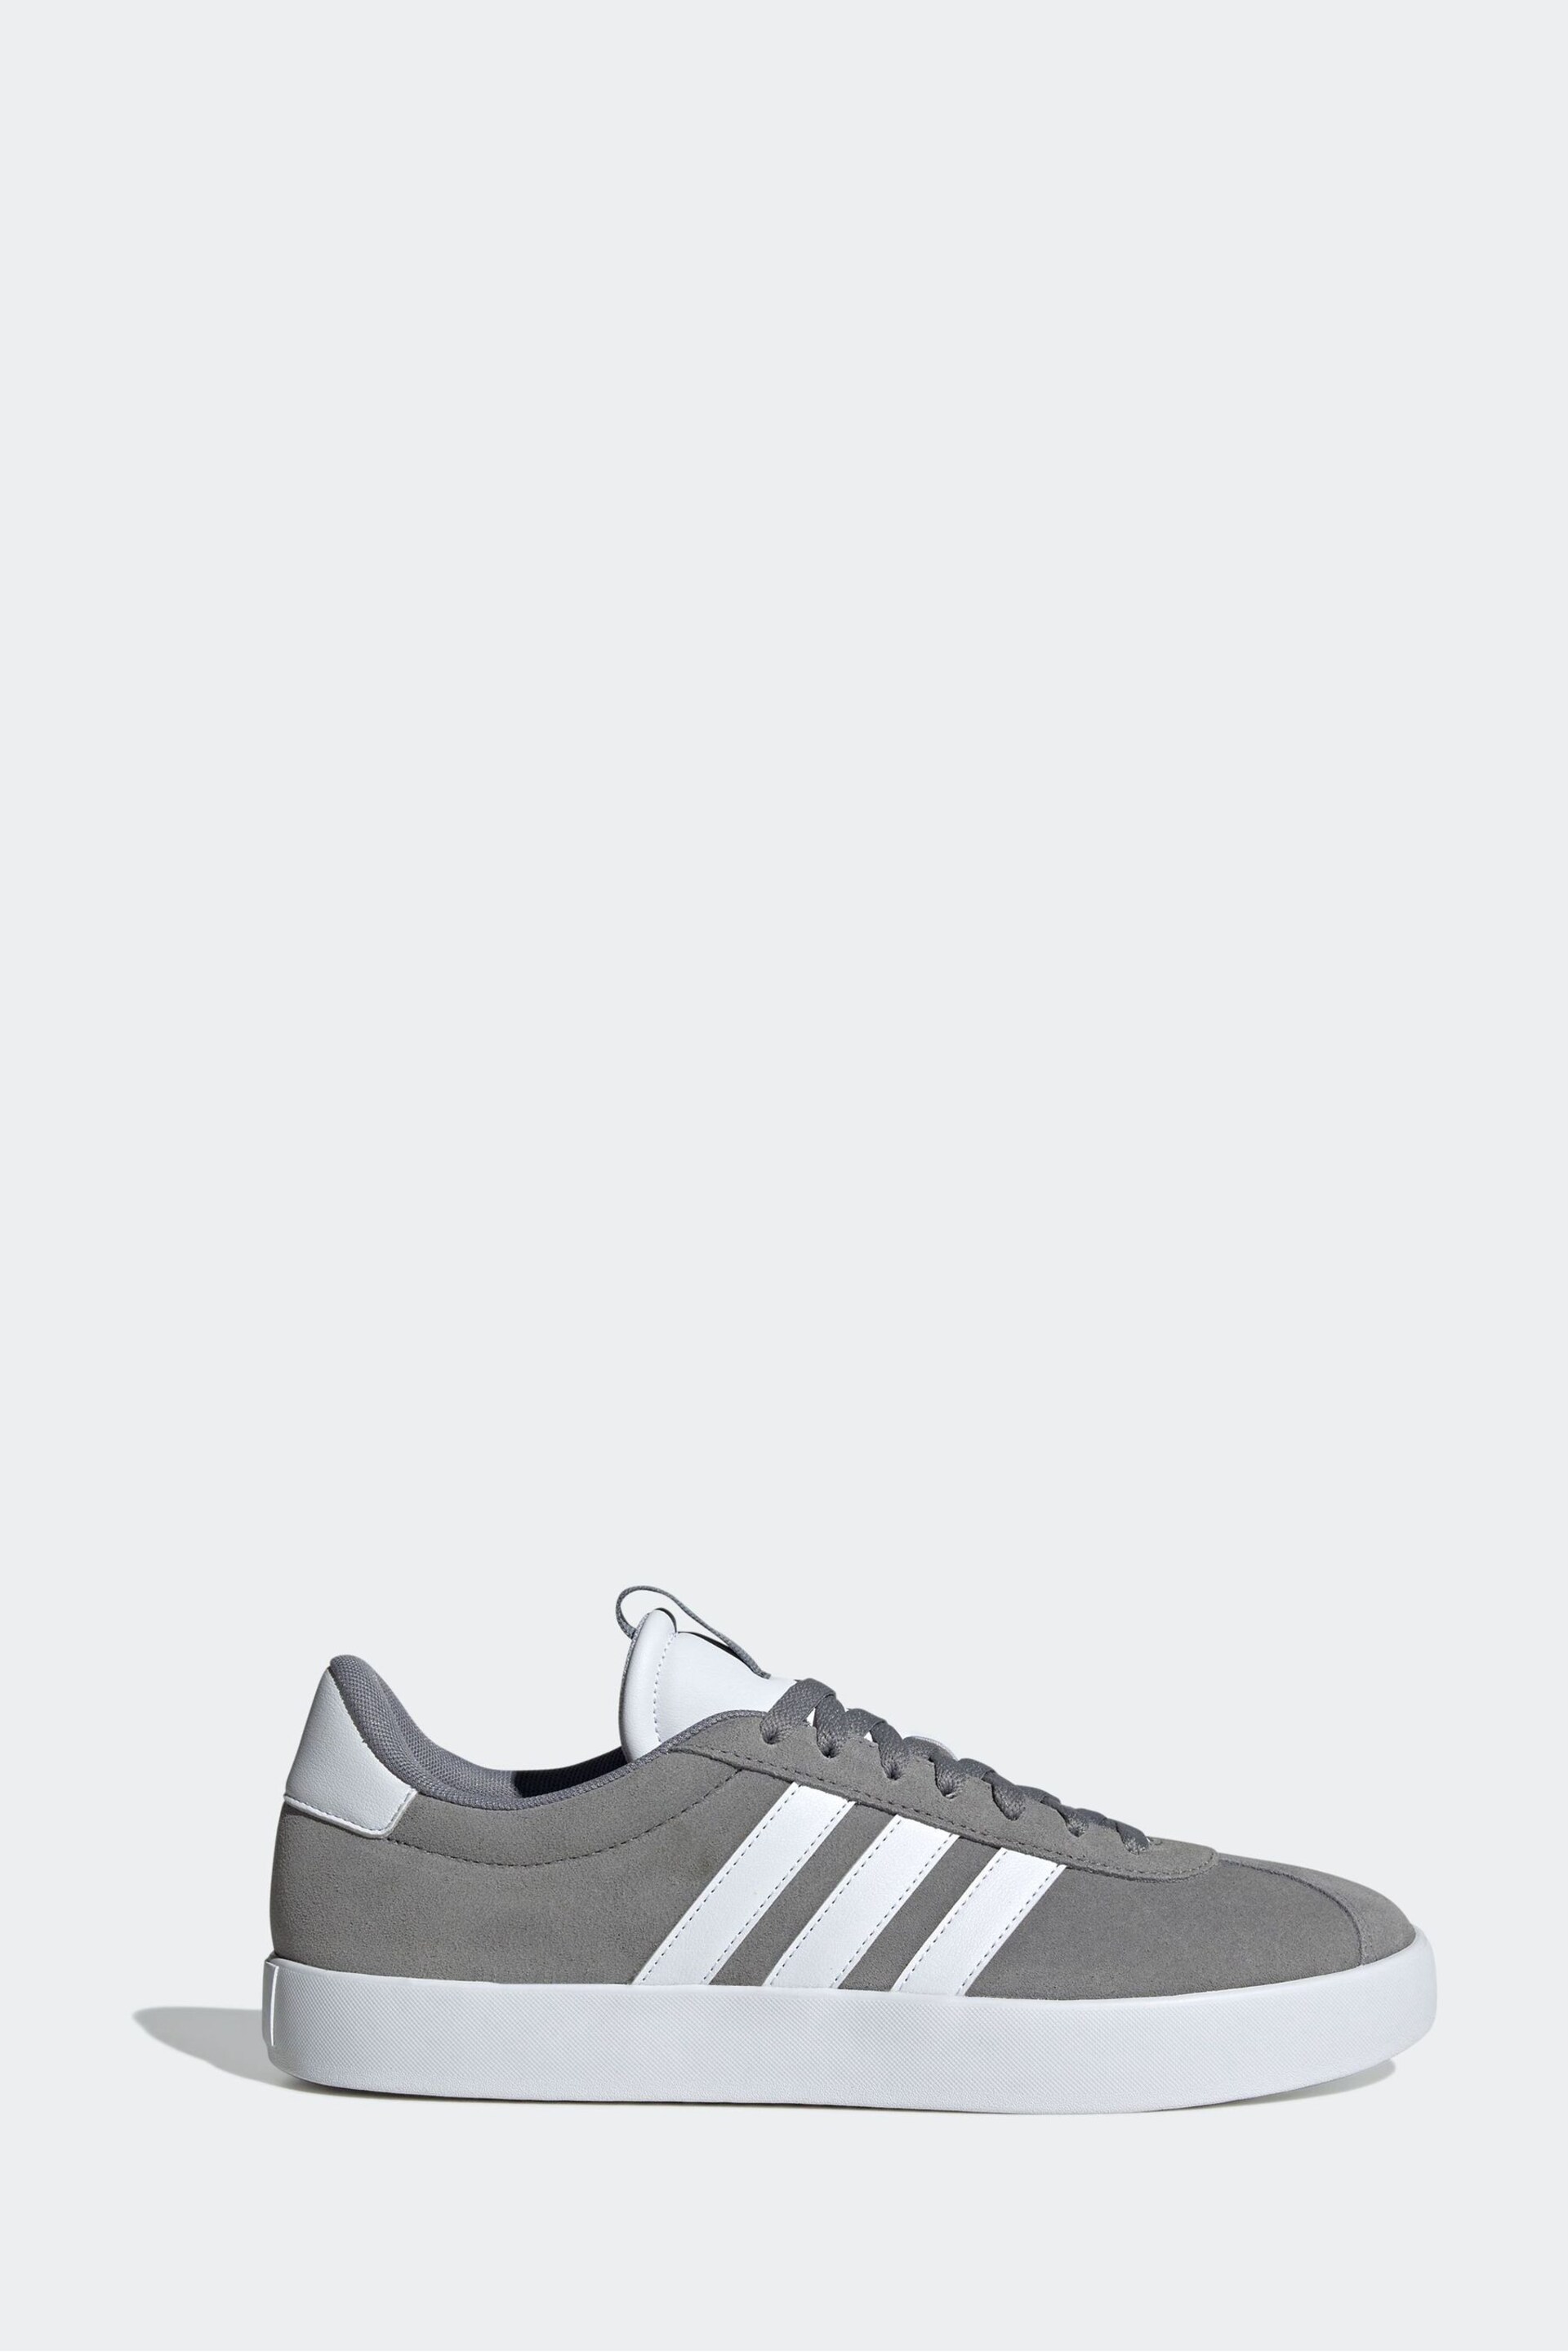 adidas Grey/White VL Court 3.0 Trainers - Image 11 of 11